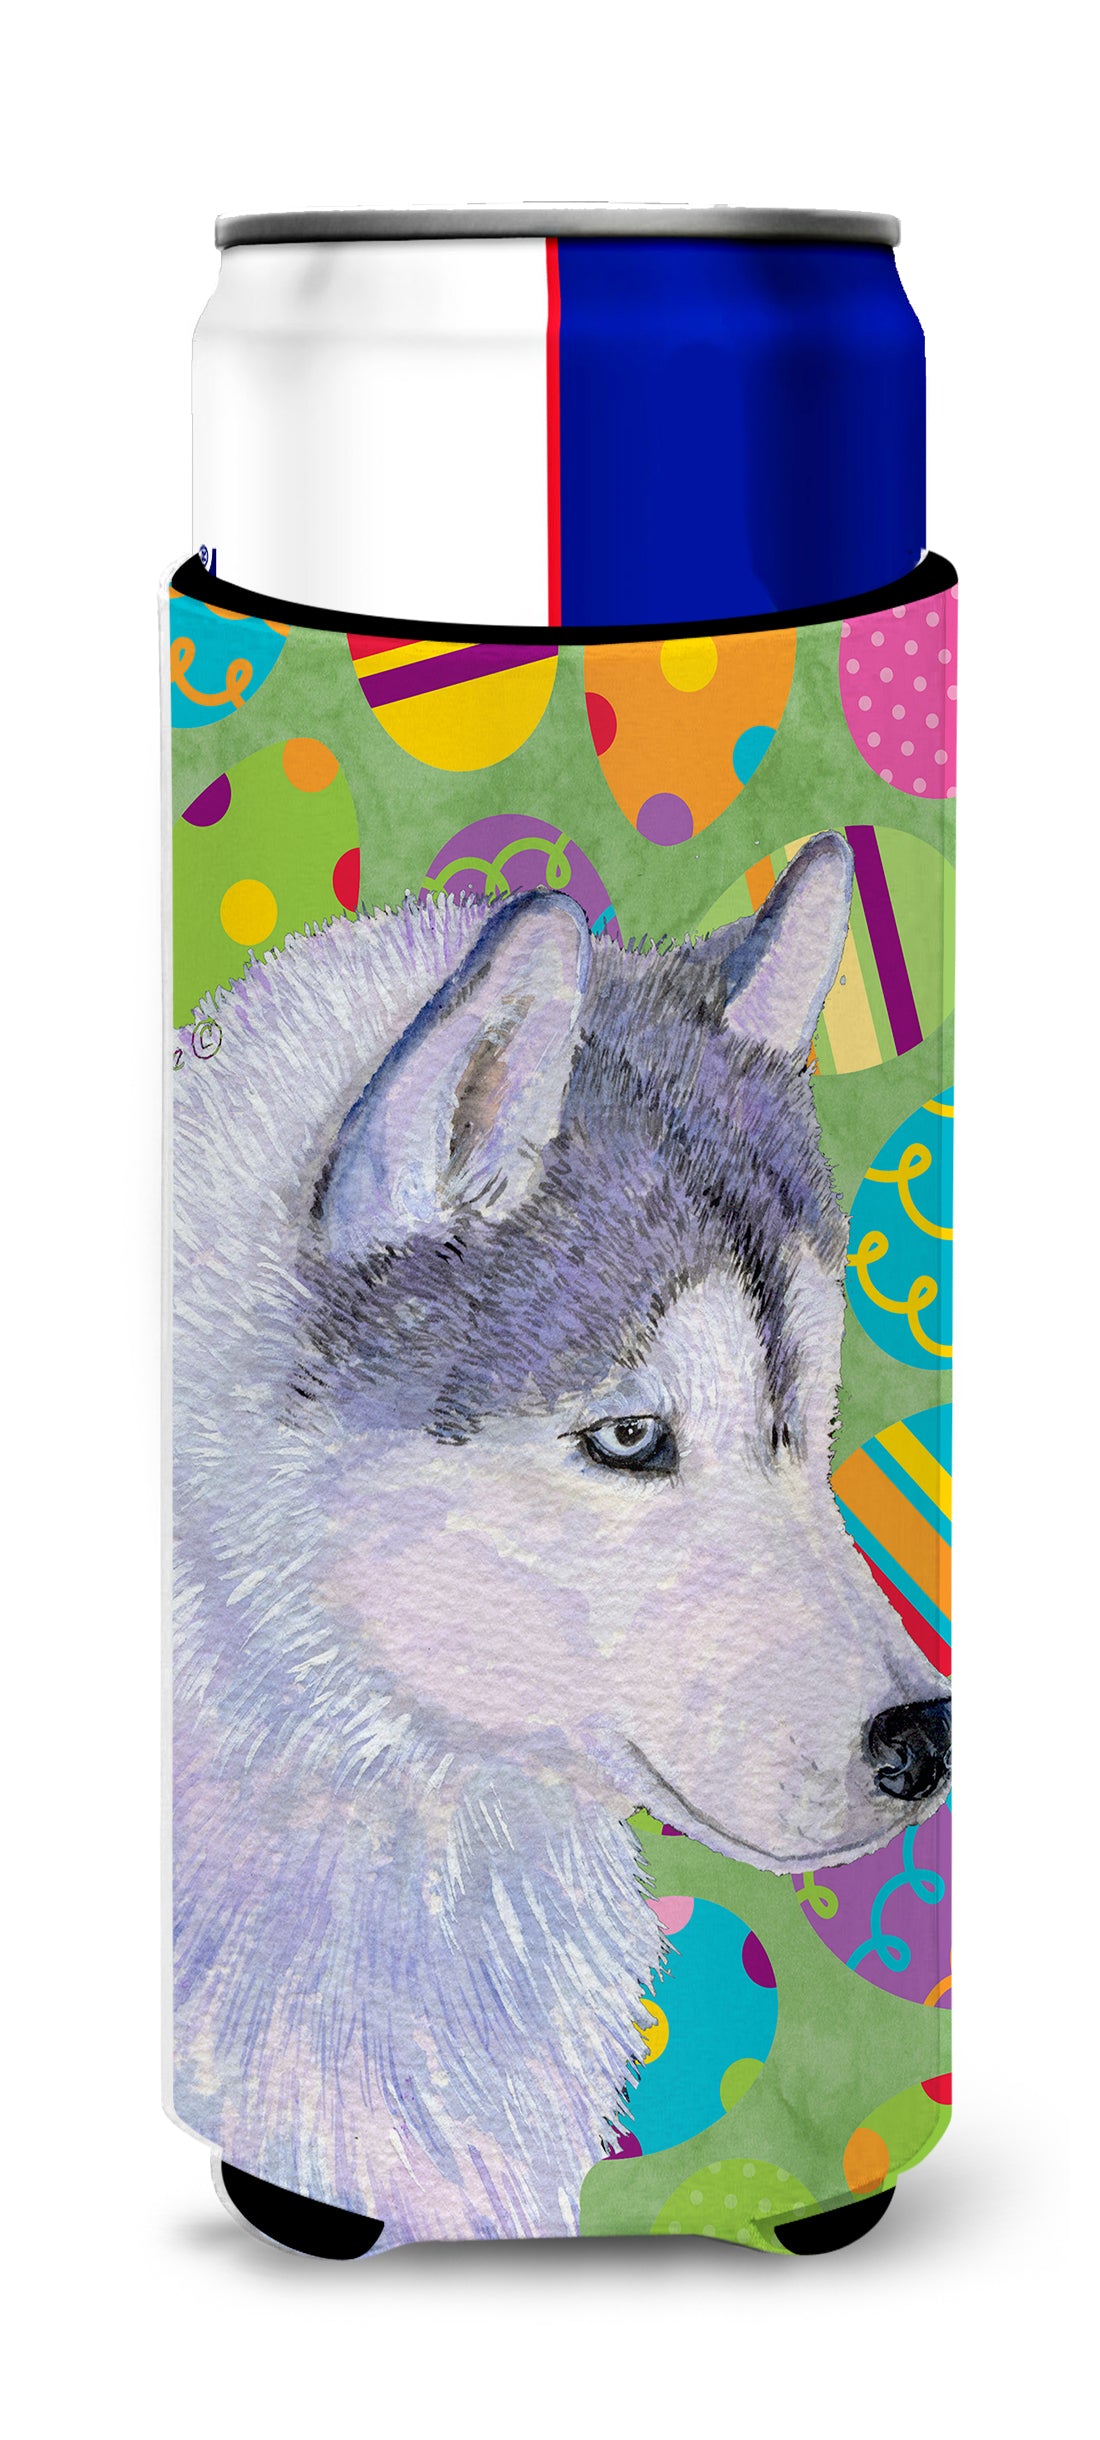 Siberian Husky Easter Eggtravaganza Ultra Beverage Insulators for slim cans SS4809MUK